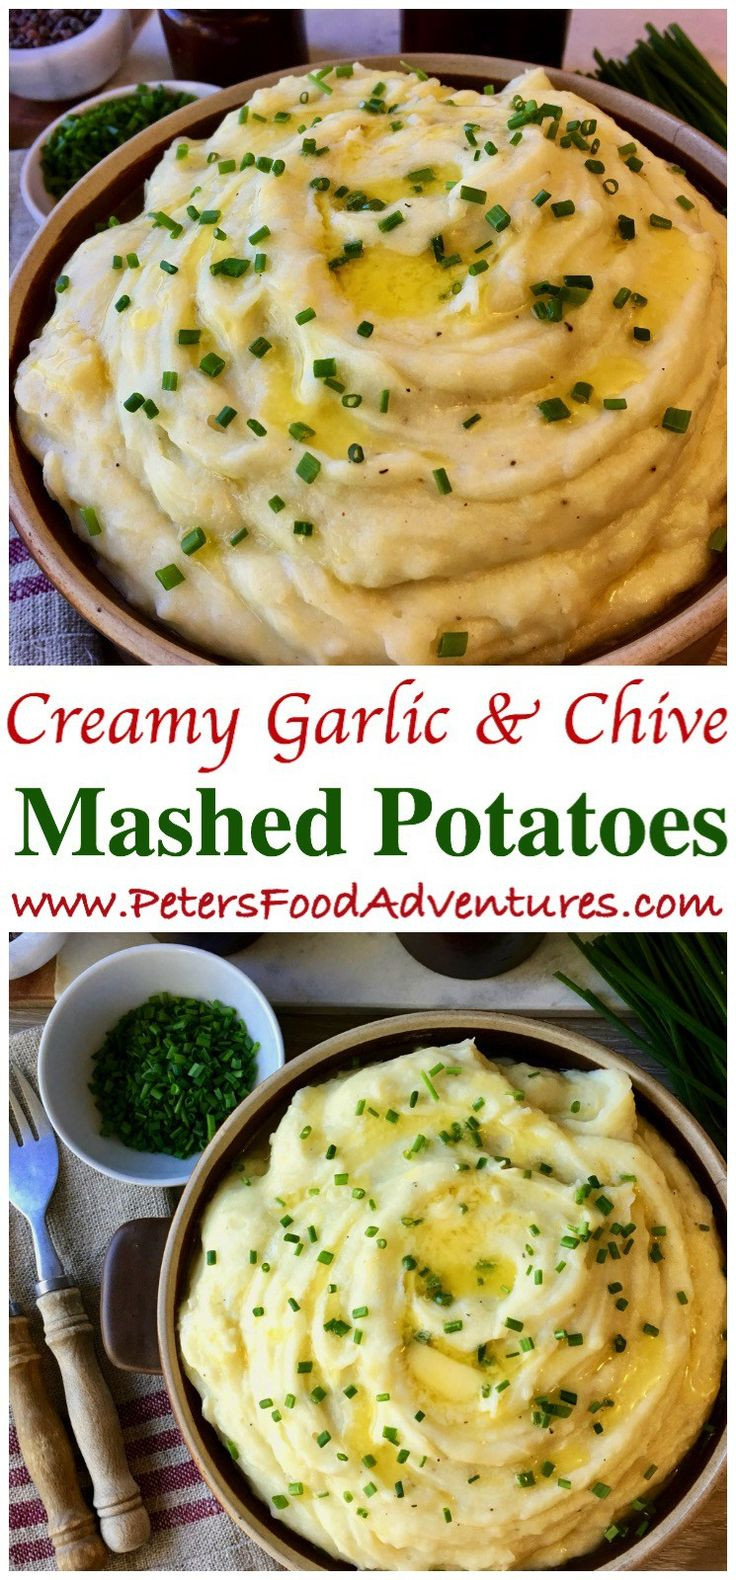 Mashed Potatoes Thanksgiving Recipe
 Best 25 Thanksgiving recipes ideas on Pinterest